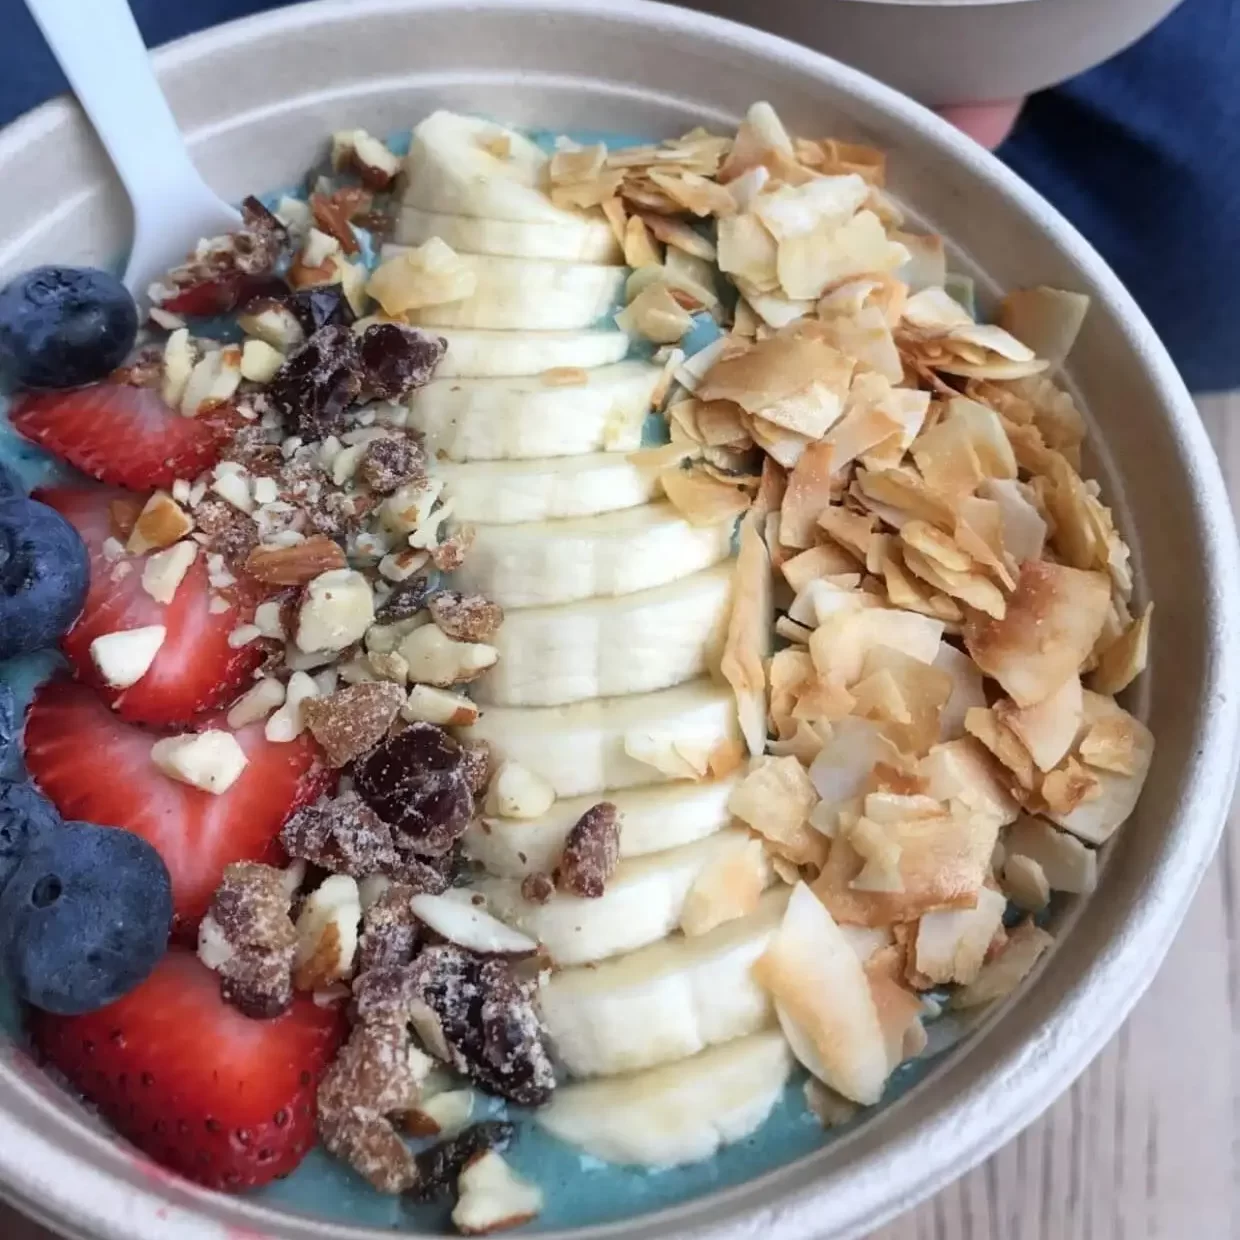 acai bowl from cocobeet